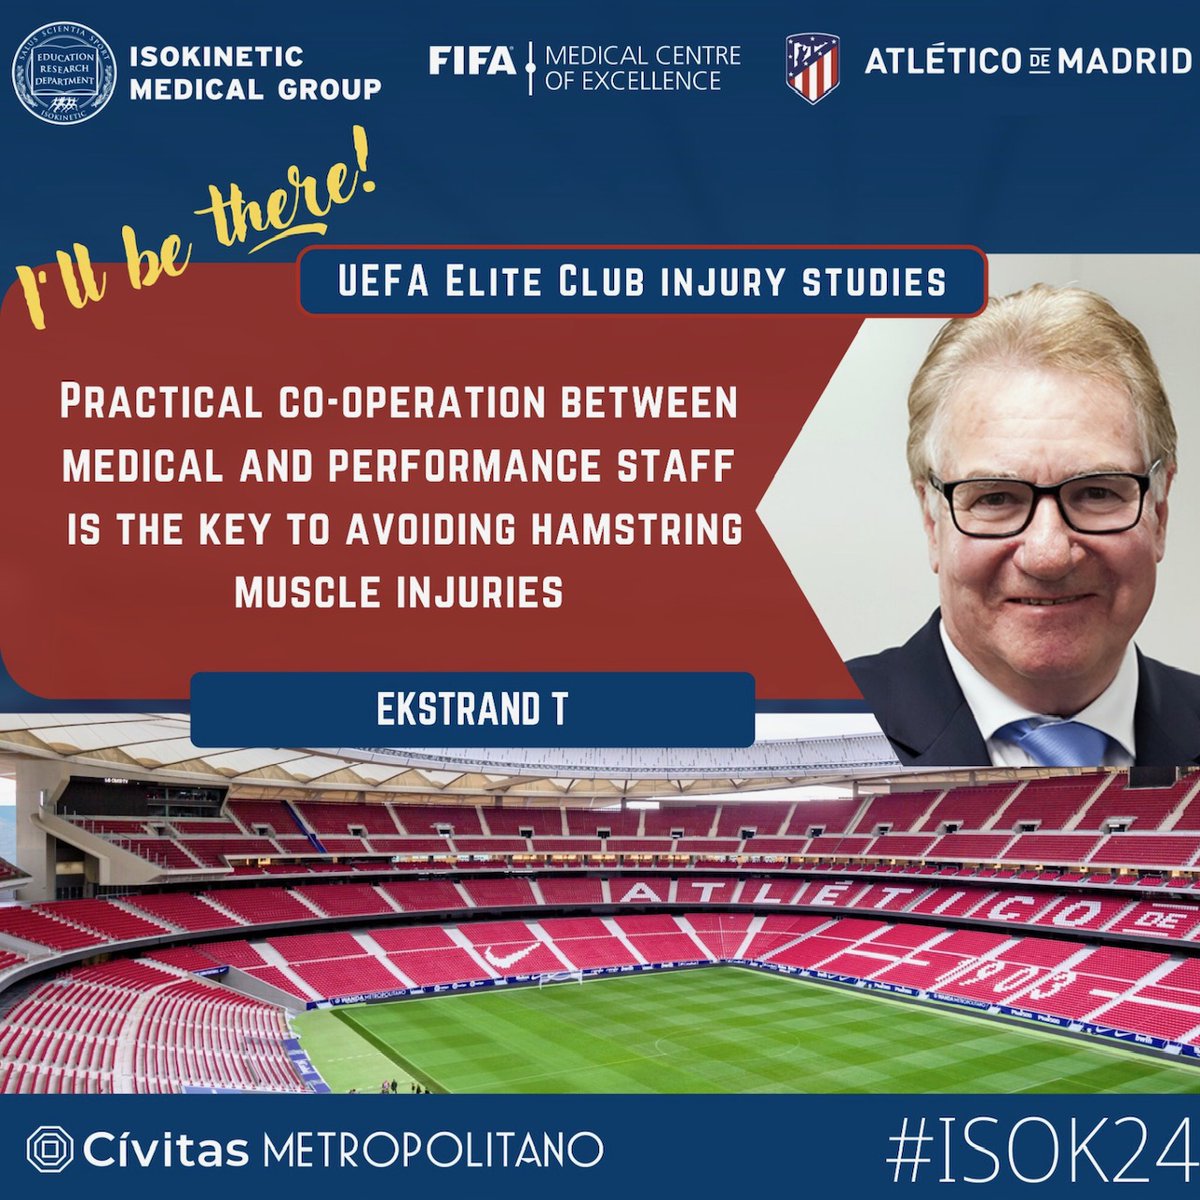 See you there! #ISOK24 Madrid 25-27 May isokineticconference.com @frgsweden